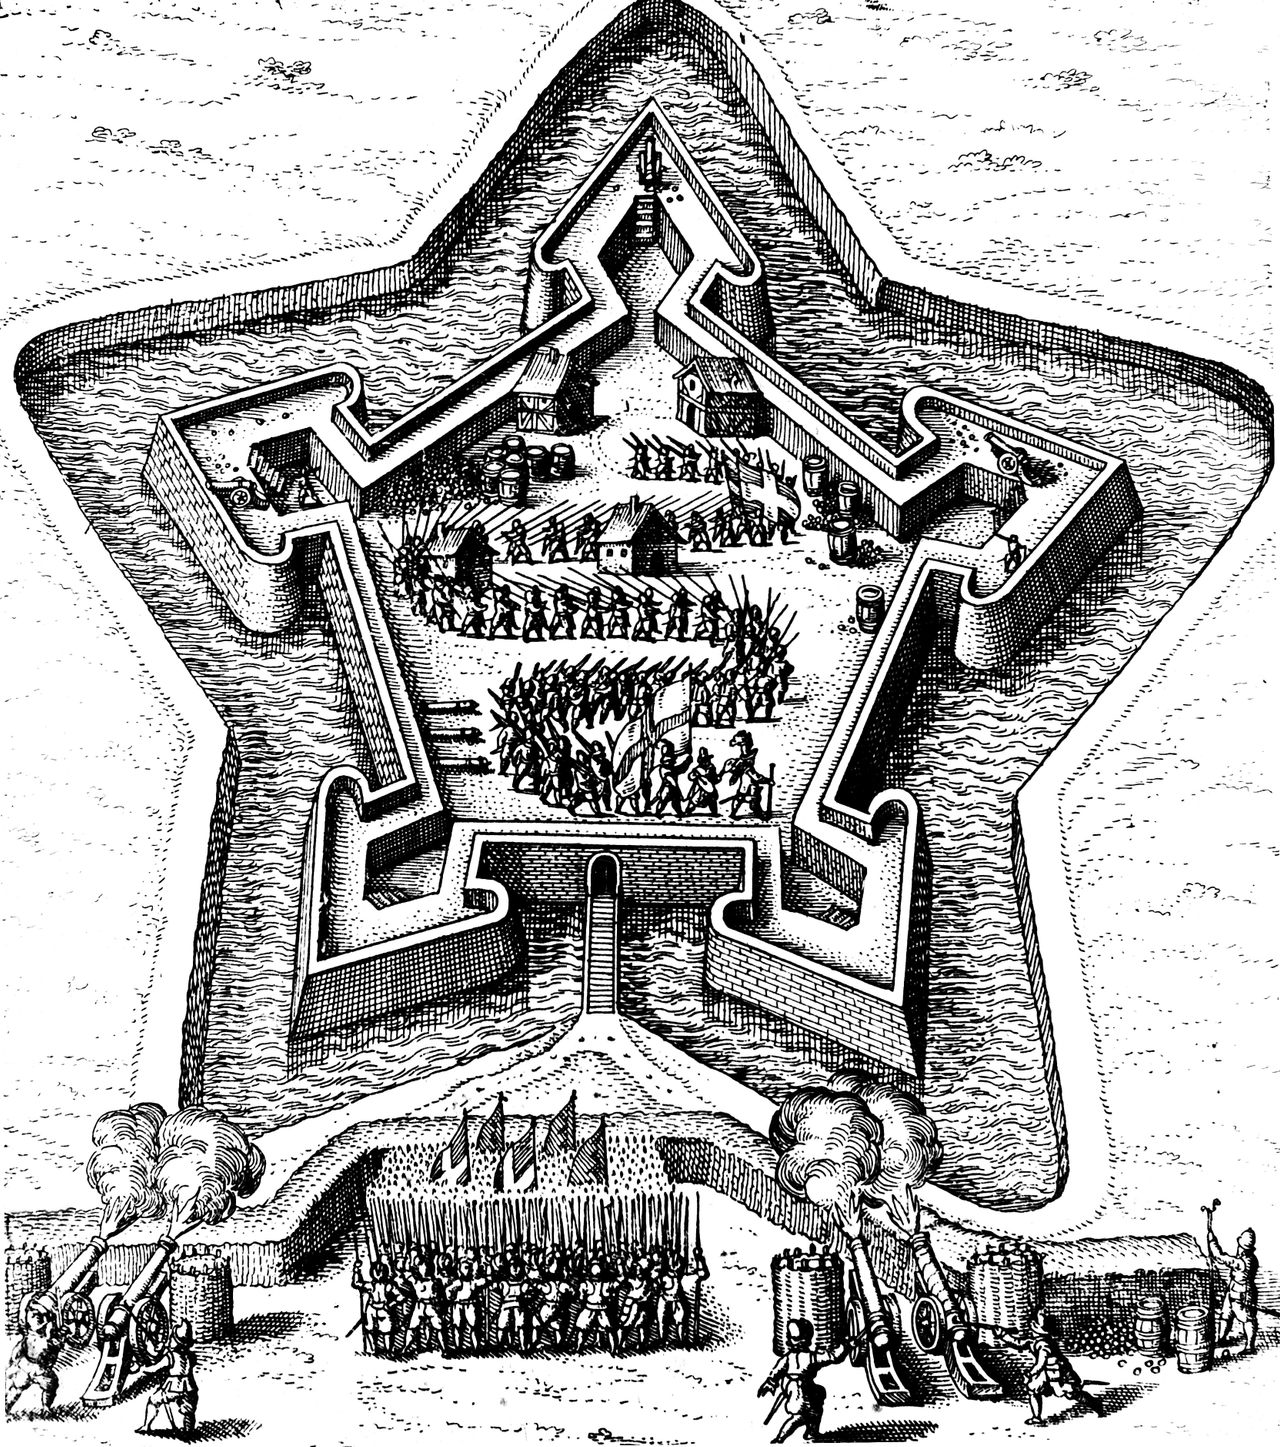 A 17th-century engraving depicts a star fort coming under siege.